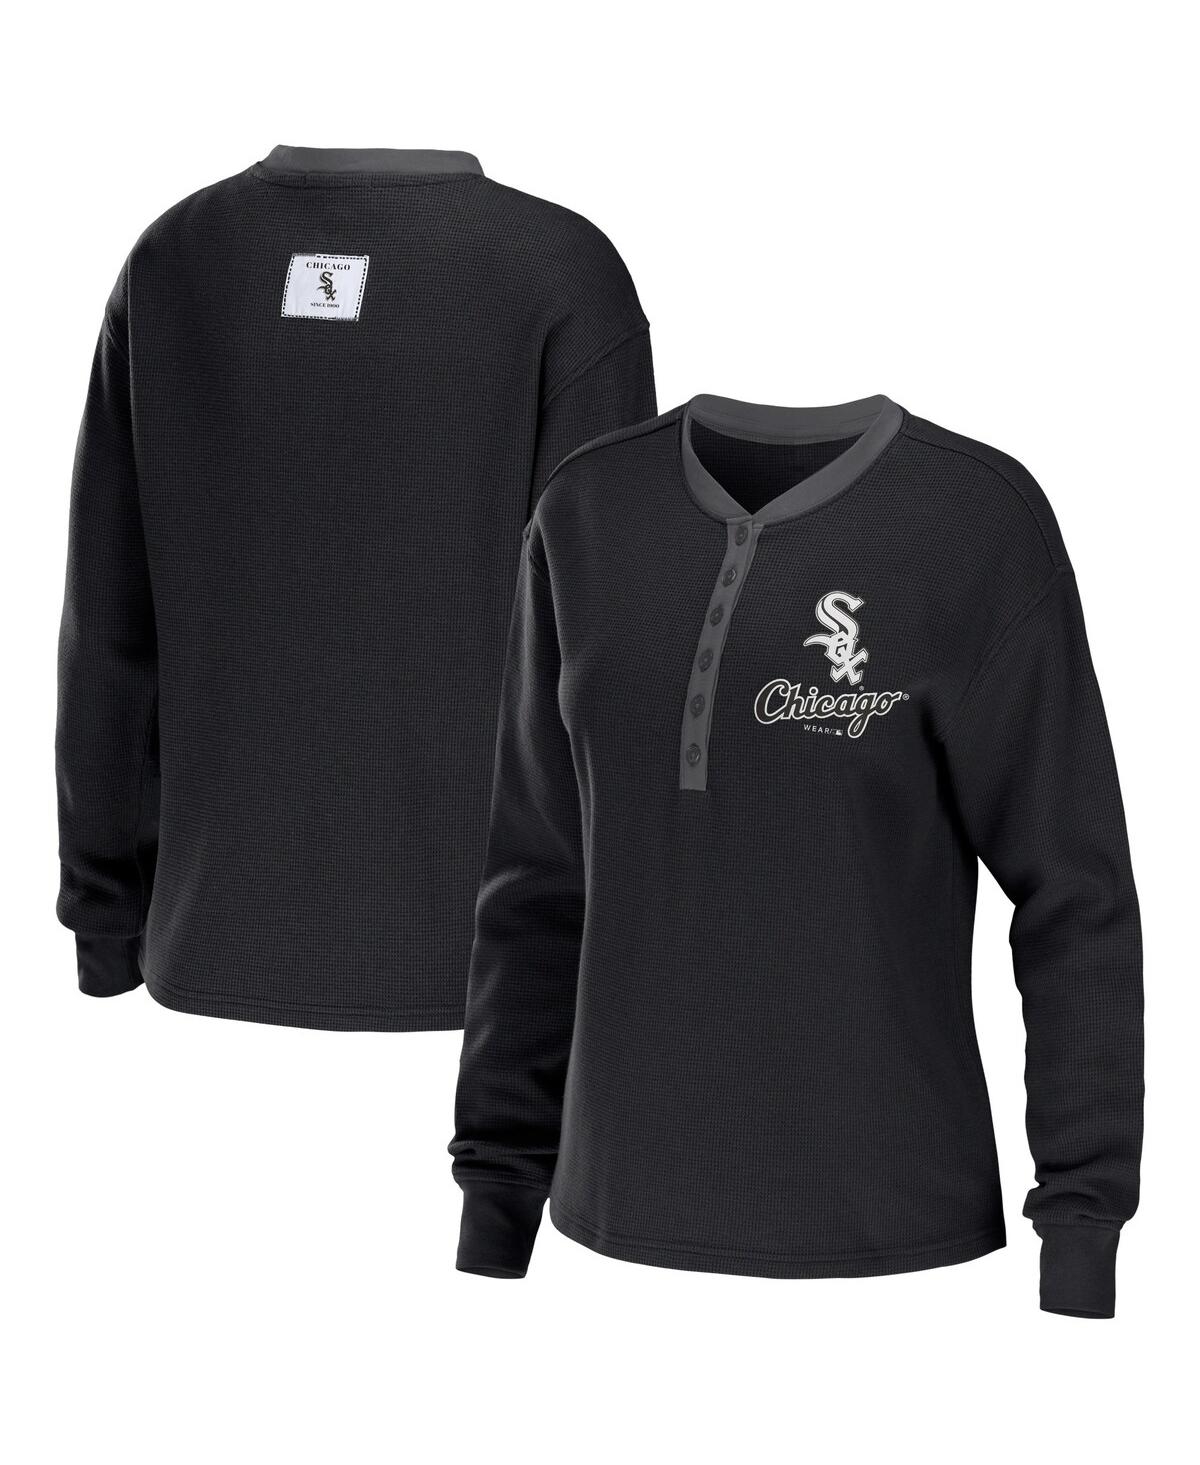 Shop Wear By Erin Andrews Women's  Black Chicago White Sox Waffle Henley Long Sleeve T-shirt